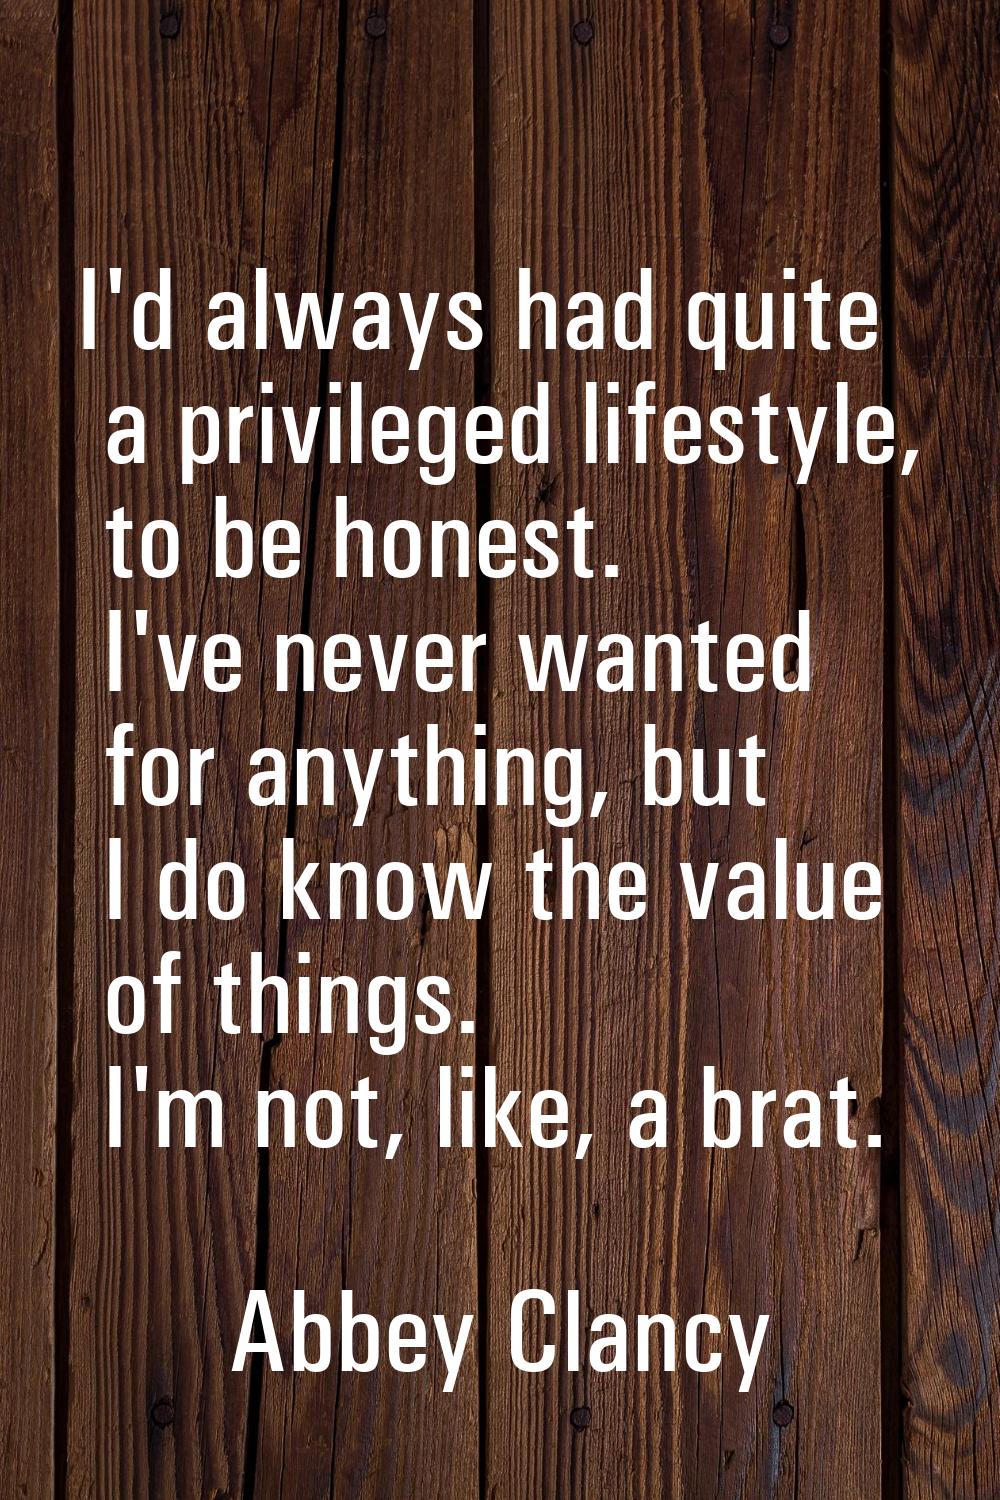 I'd always had quite a privileged lifestyle, to be honest. I've never wanted for anything, but I do